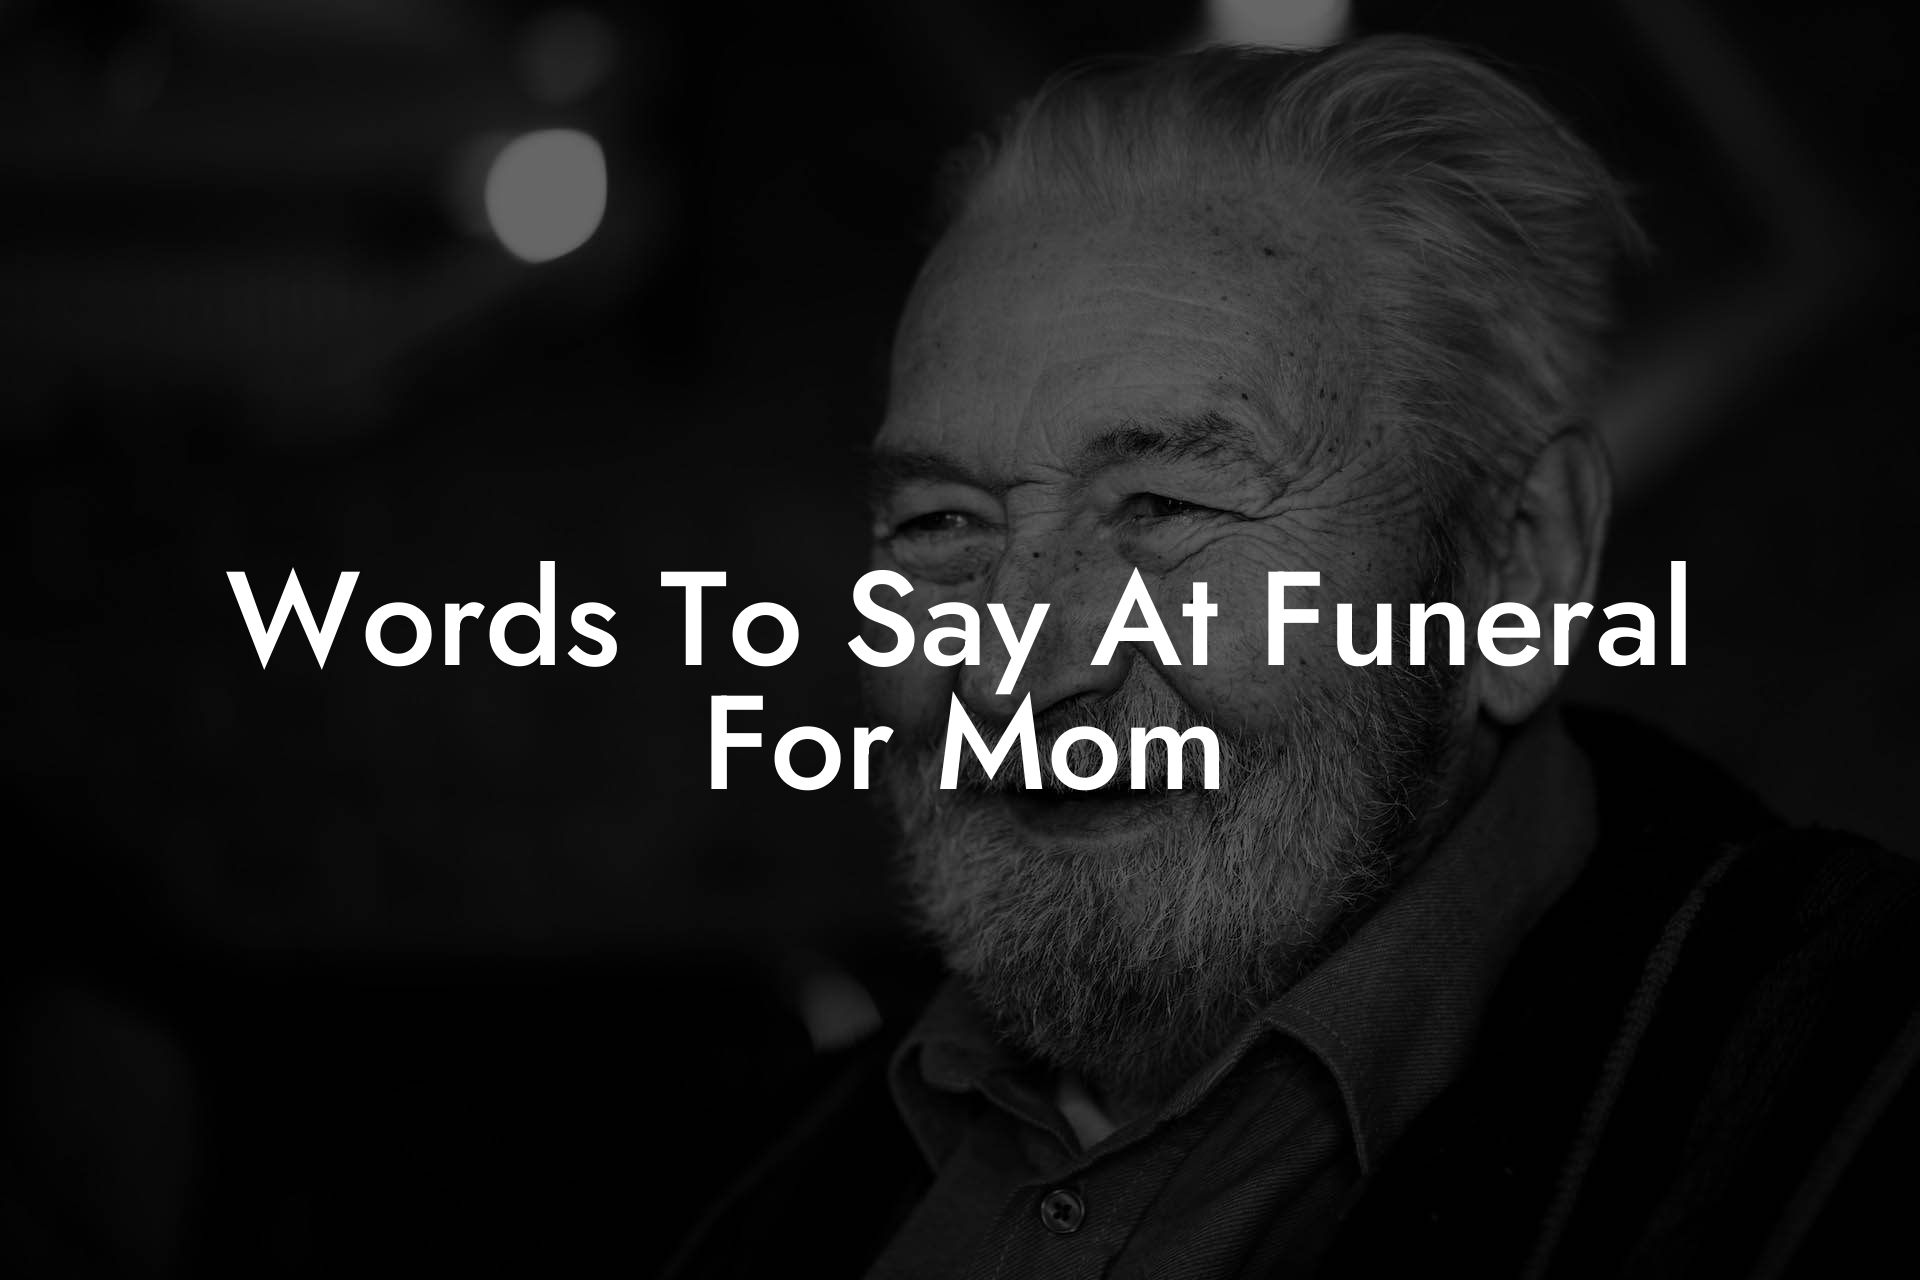 Words To Say At Funeral For Mom